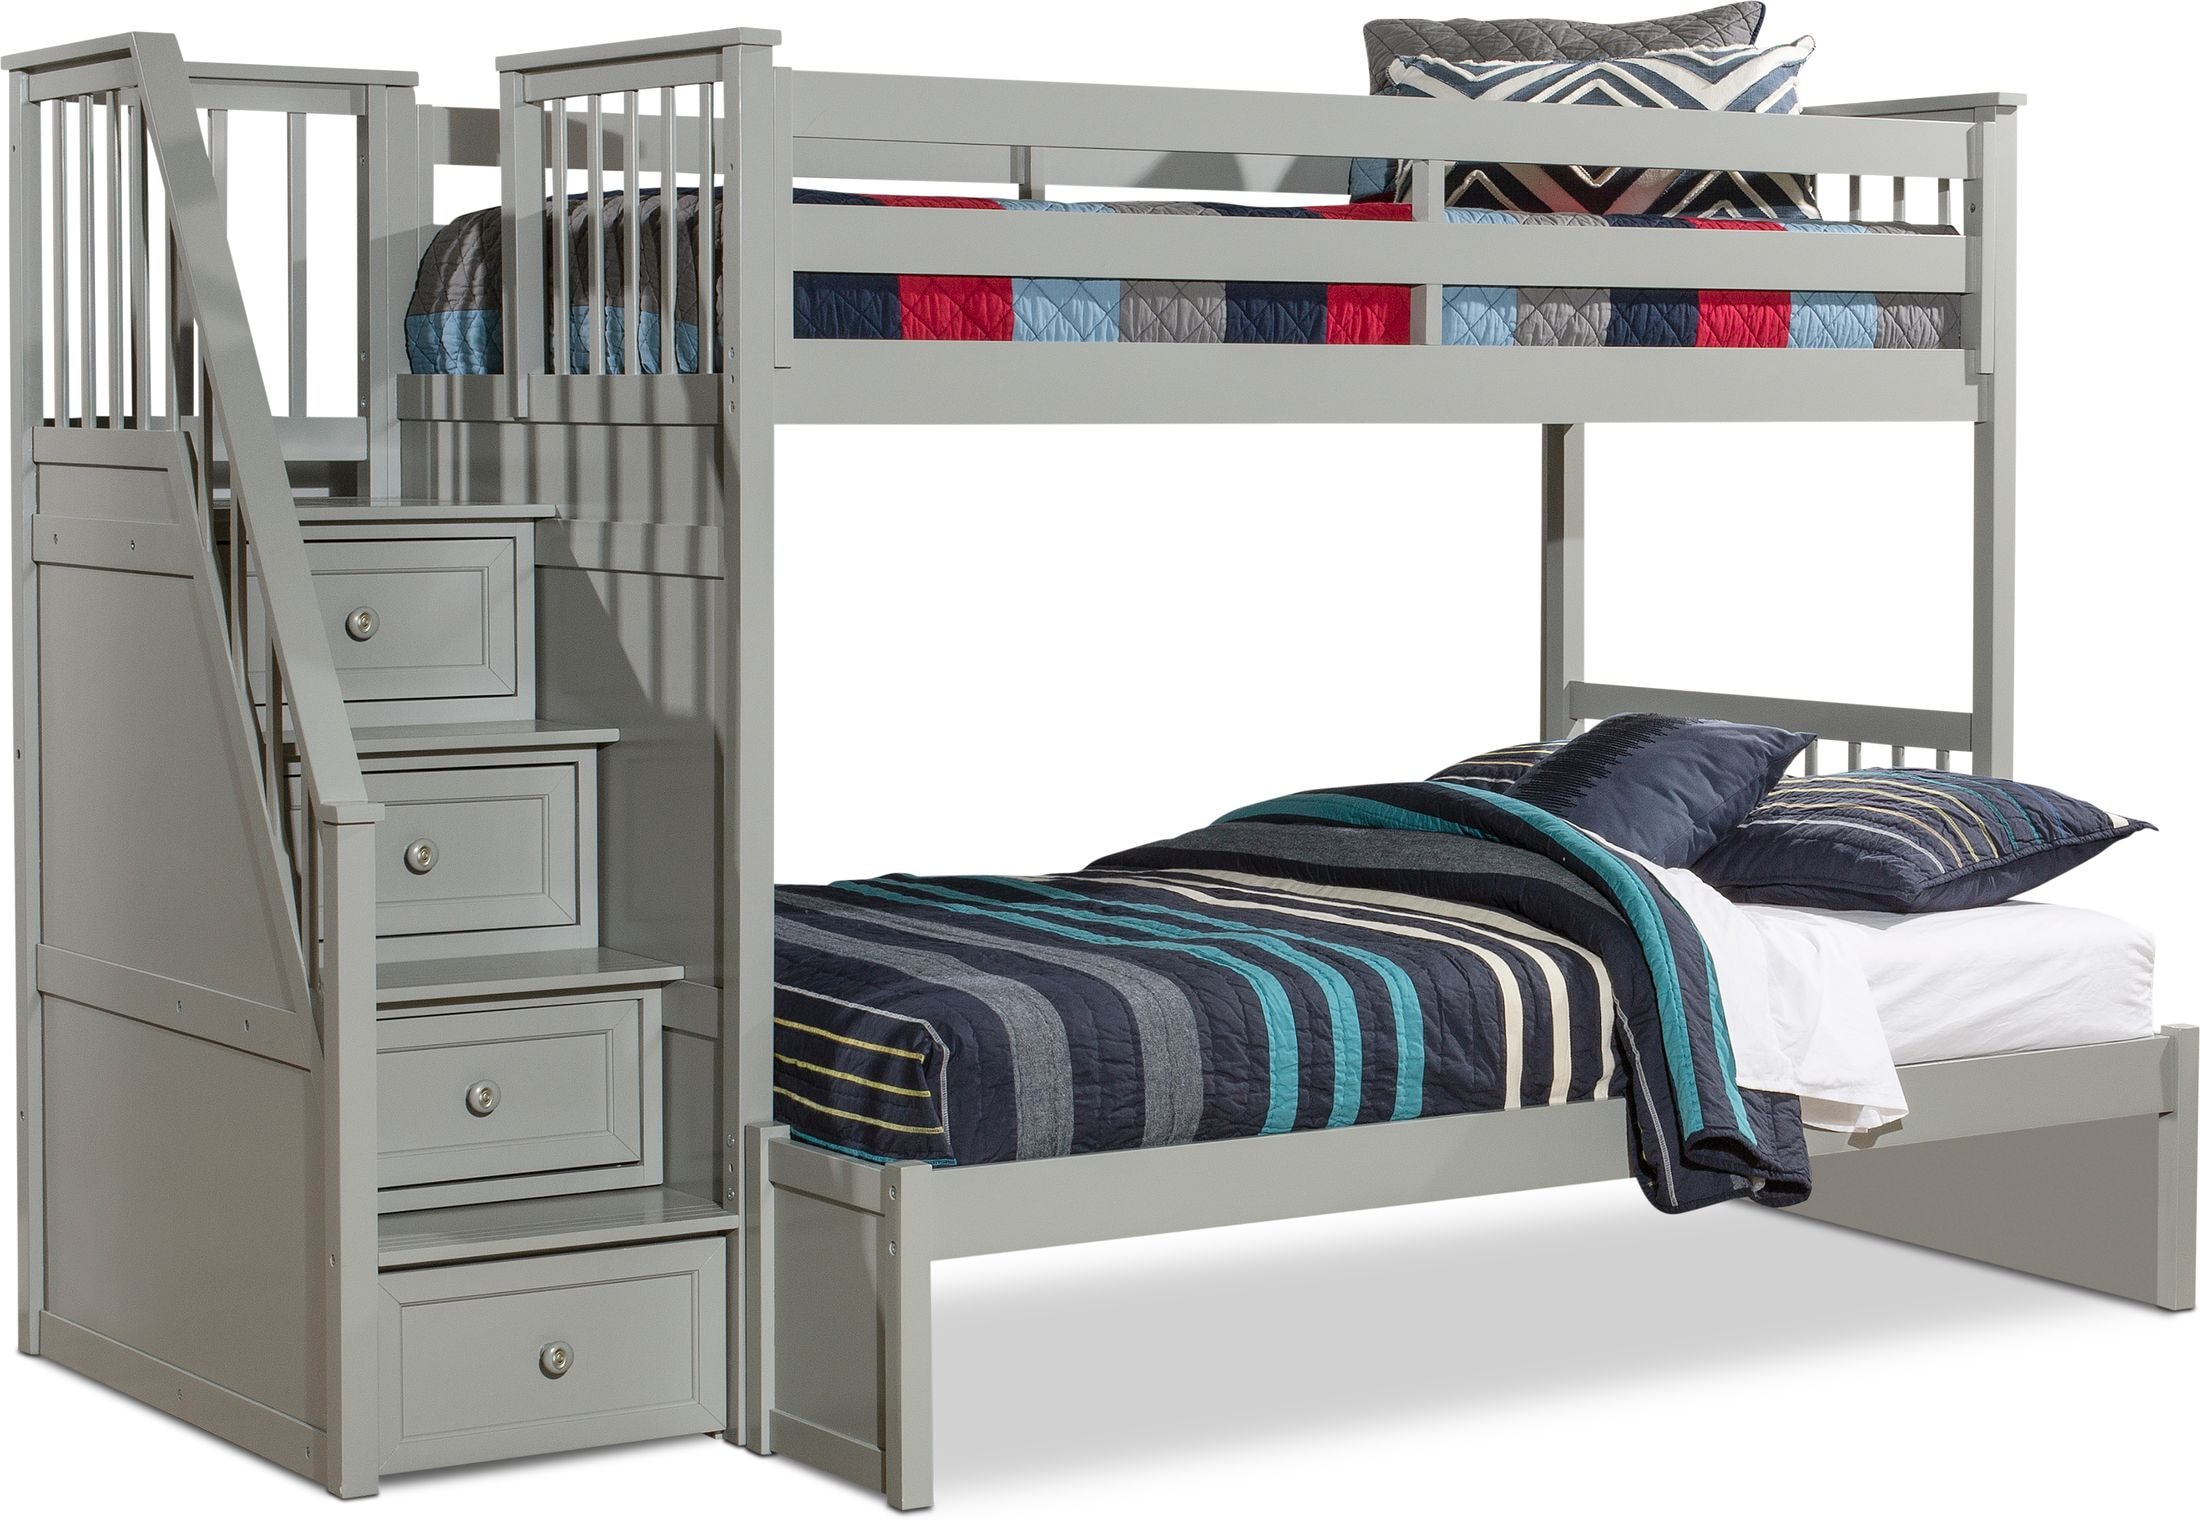 Undefined Value City Furniture, Captain Style Bunk Beds